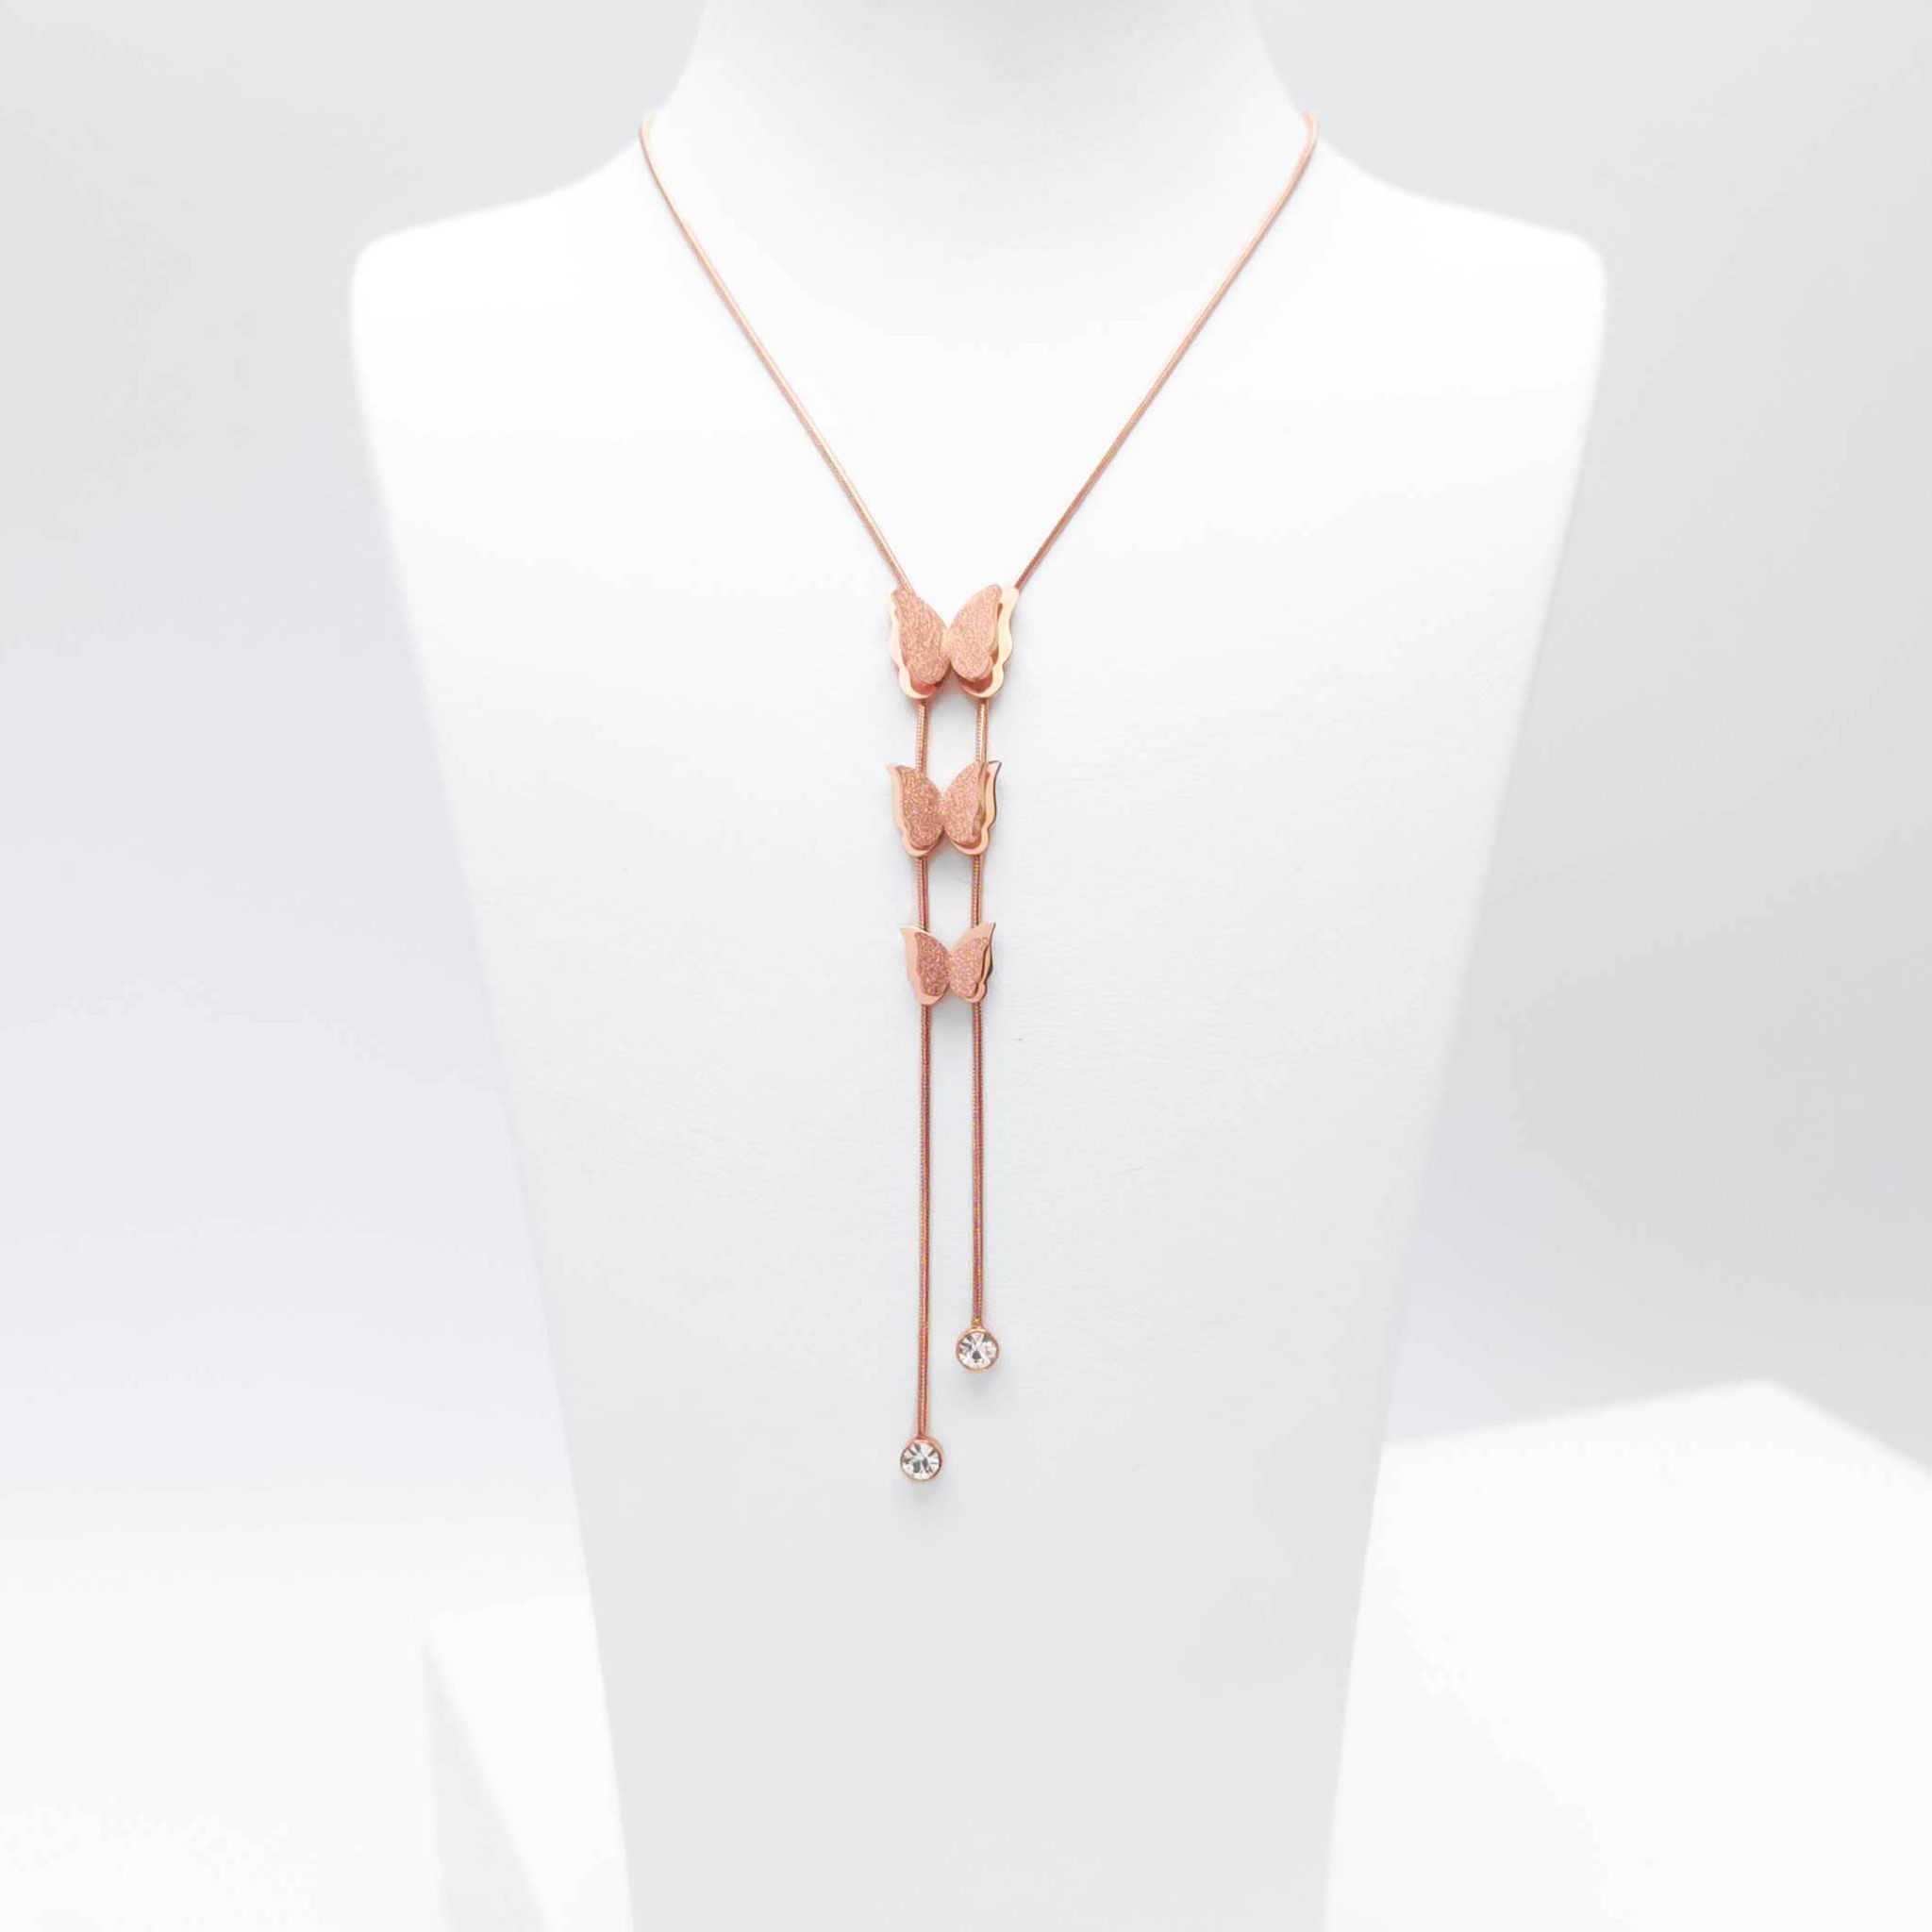 1- Butterfly Evolution Halsband Modern and trendy Necklace and women jewelry and accessories from SWEVALI fashion Sweden